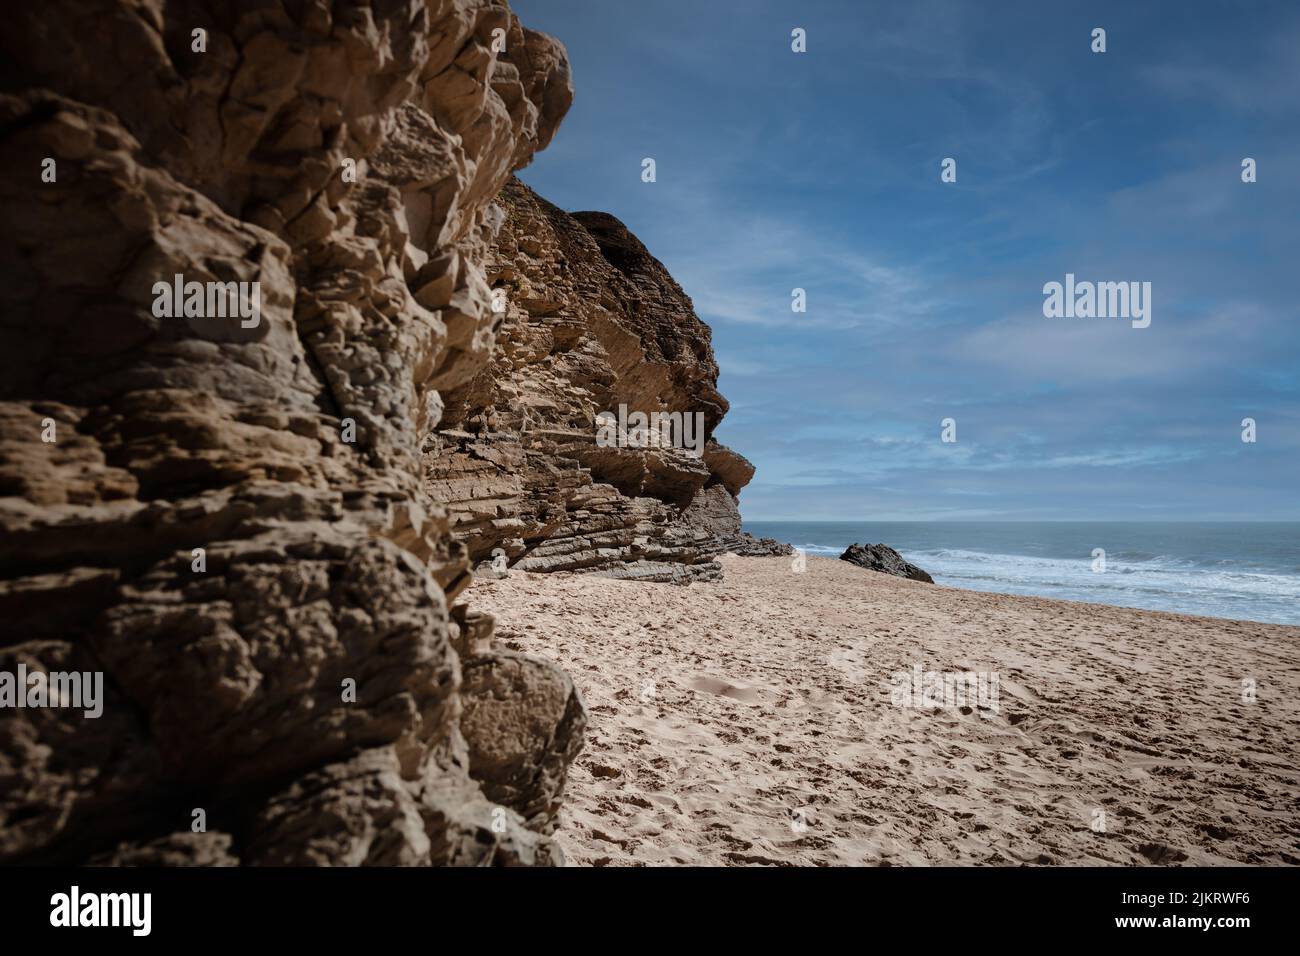 Praia da Murtinheira in Quiaios, Portugal, a quiet and wild beach away from the crowds. Close-up of rocky shore, sand and blue sky. Landscape photo Stock Photo